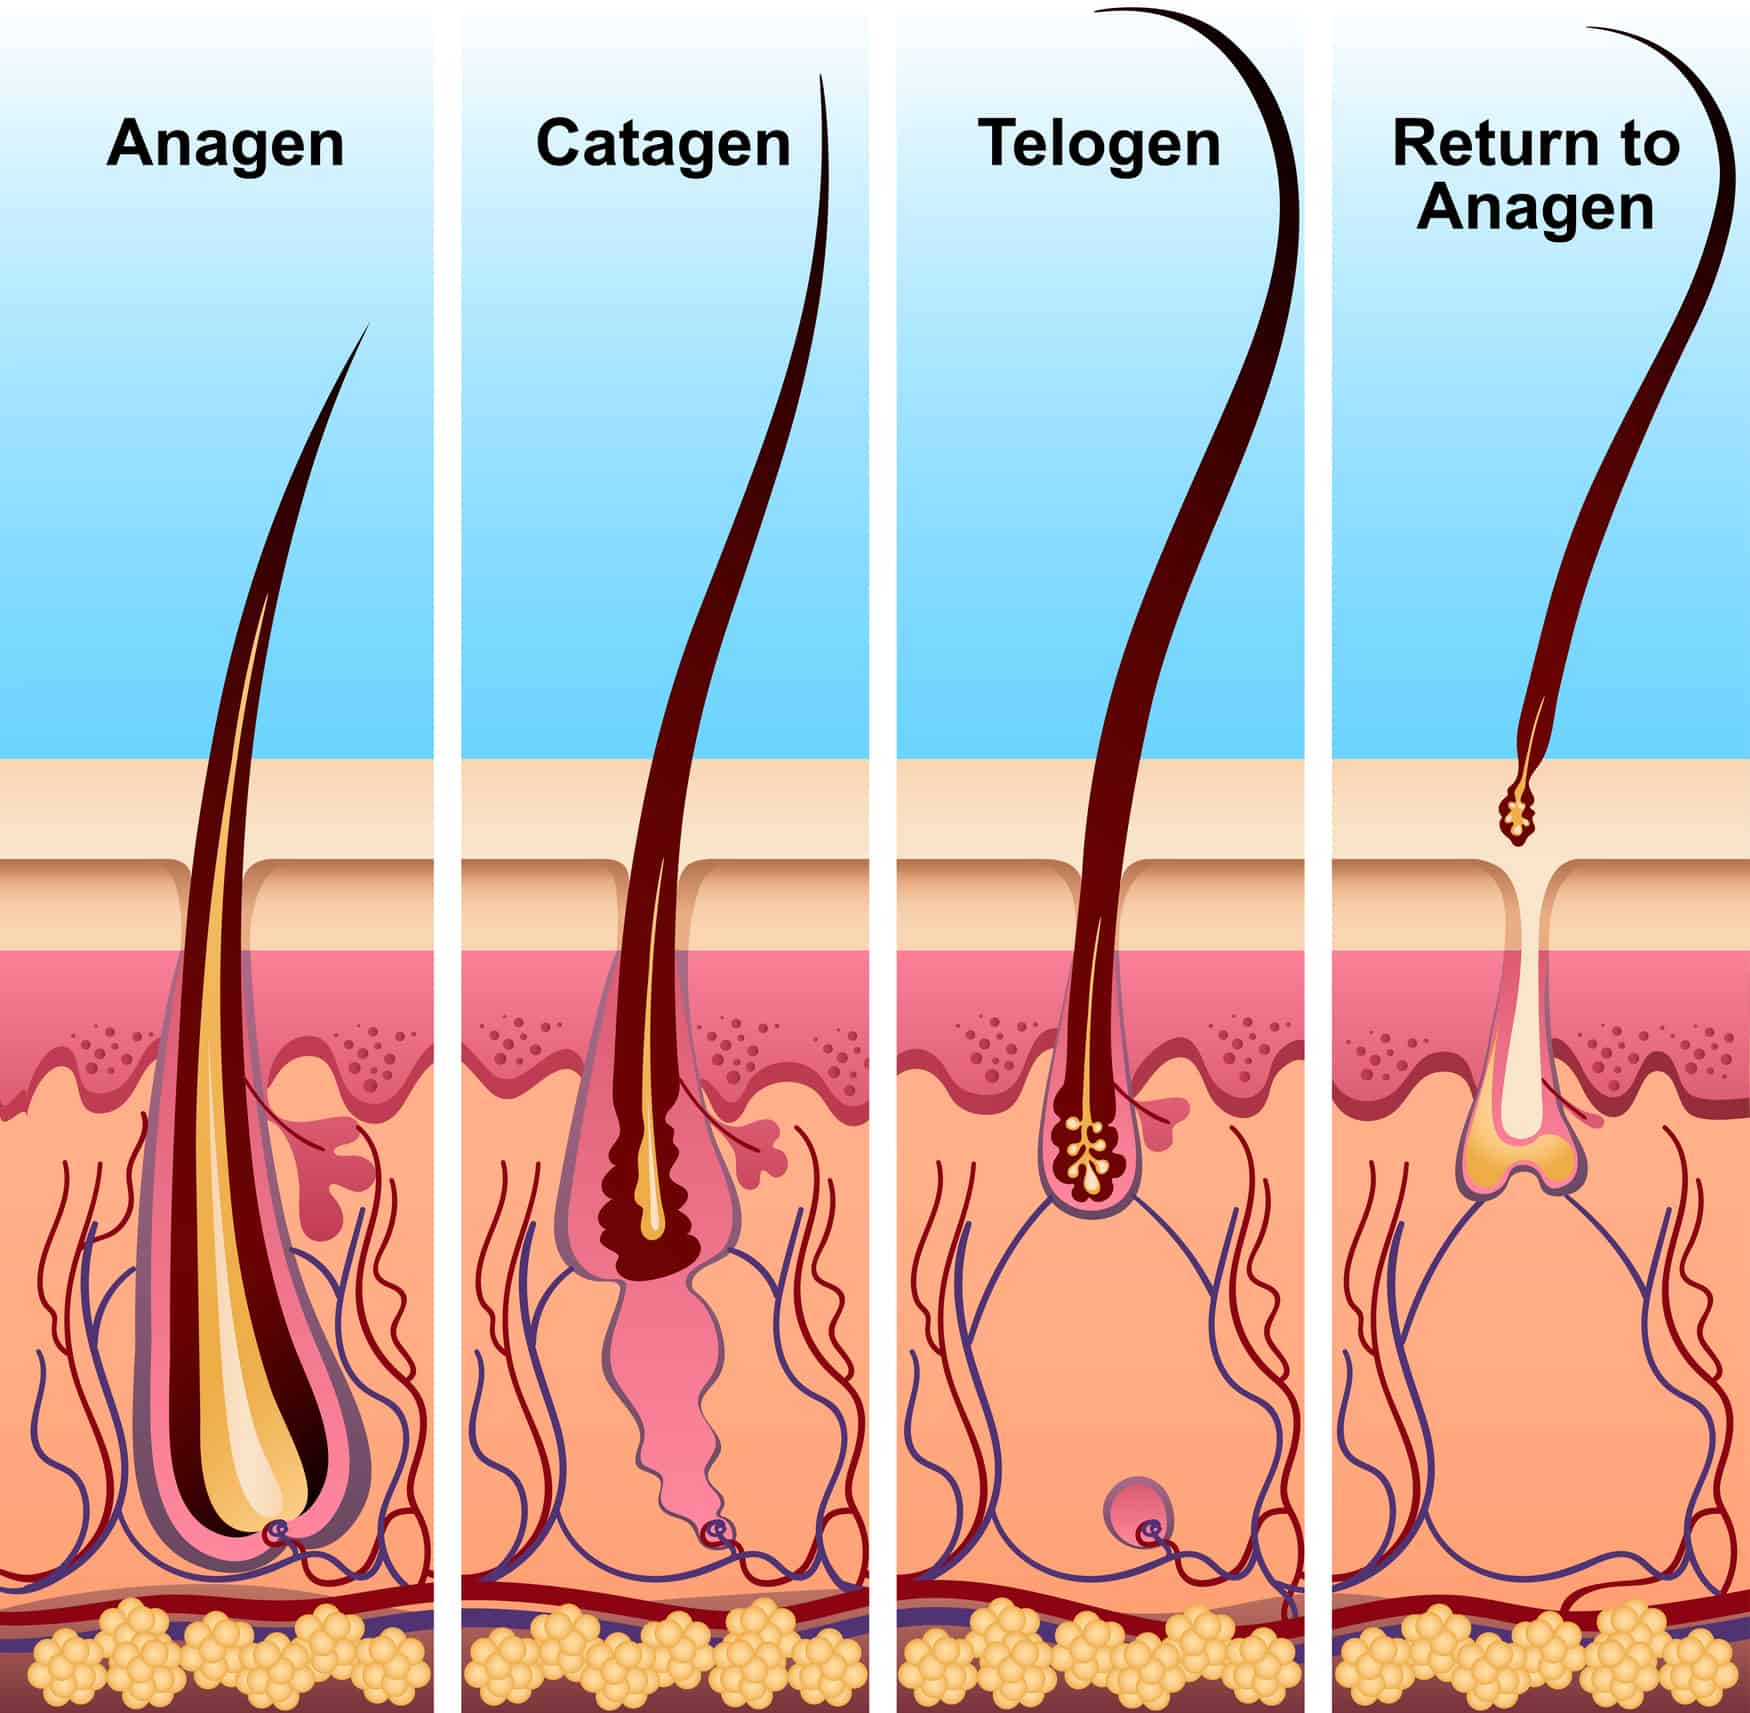 Image ID Description Hair Growth Cycle Description.  It begins with a large follicle image, with small blood vessels carrying nutrients to it, with hair coming out of the hair follicles;  Then there is the part where the follicle is reduced and close to the floor of the skull, it is called catagen;  This follicle image is no longer connected to the root, now less than before, since the hair follicle is cut off, it is called Telogen;  And finally, the fourth part of the hair is placed on the head, no longer in the follicle, it is marked. "Return to Anage." Final ID 